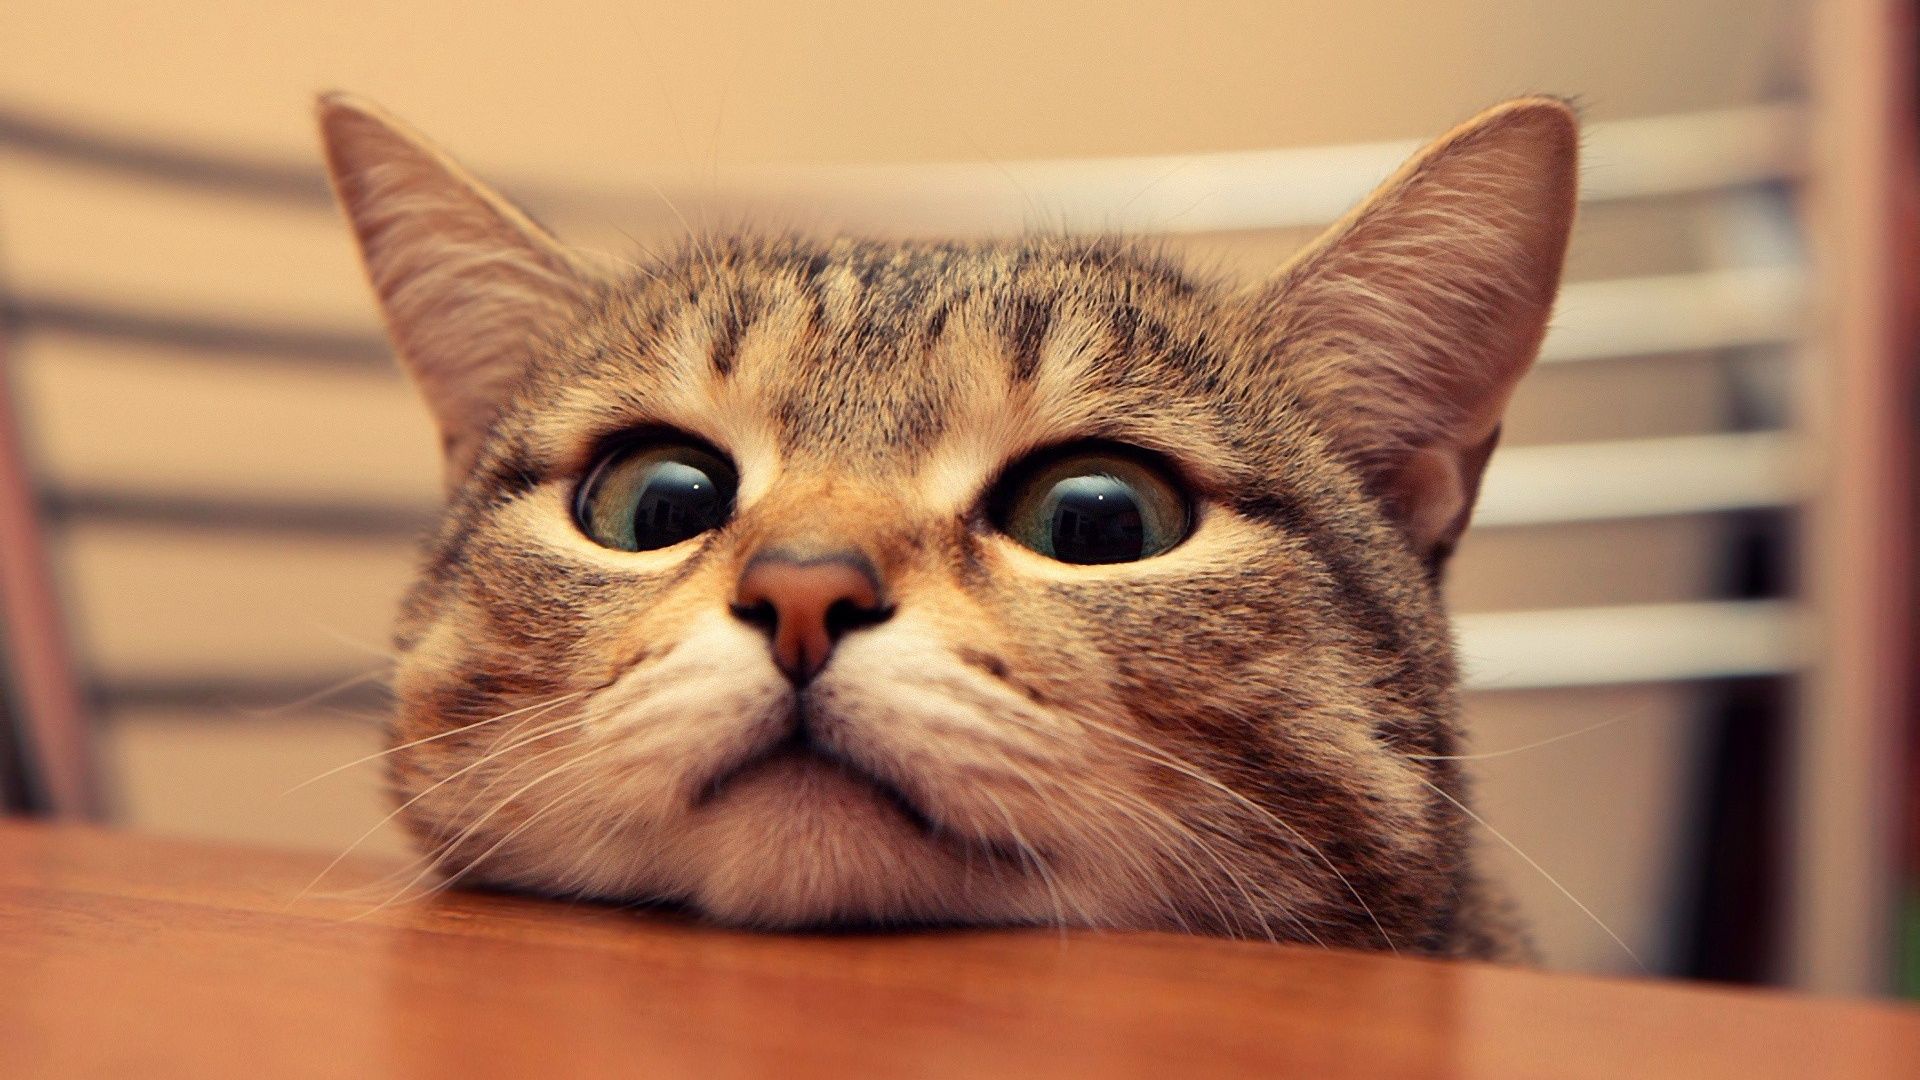 A cat with big eyes looking over a table - Cat